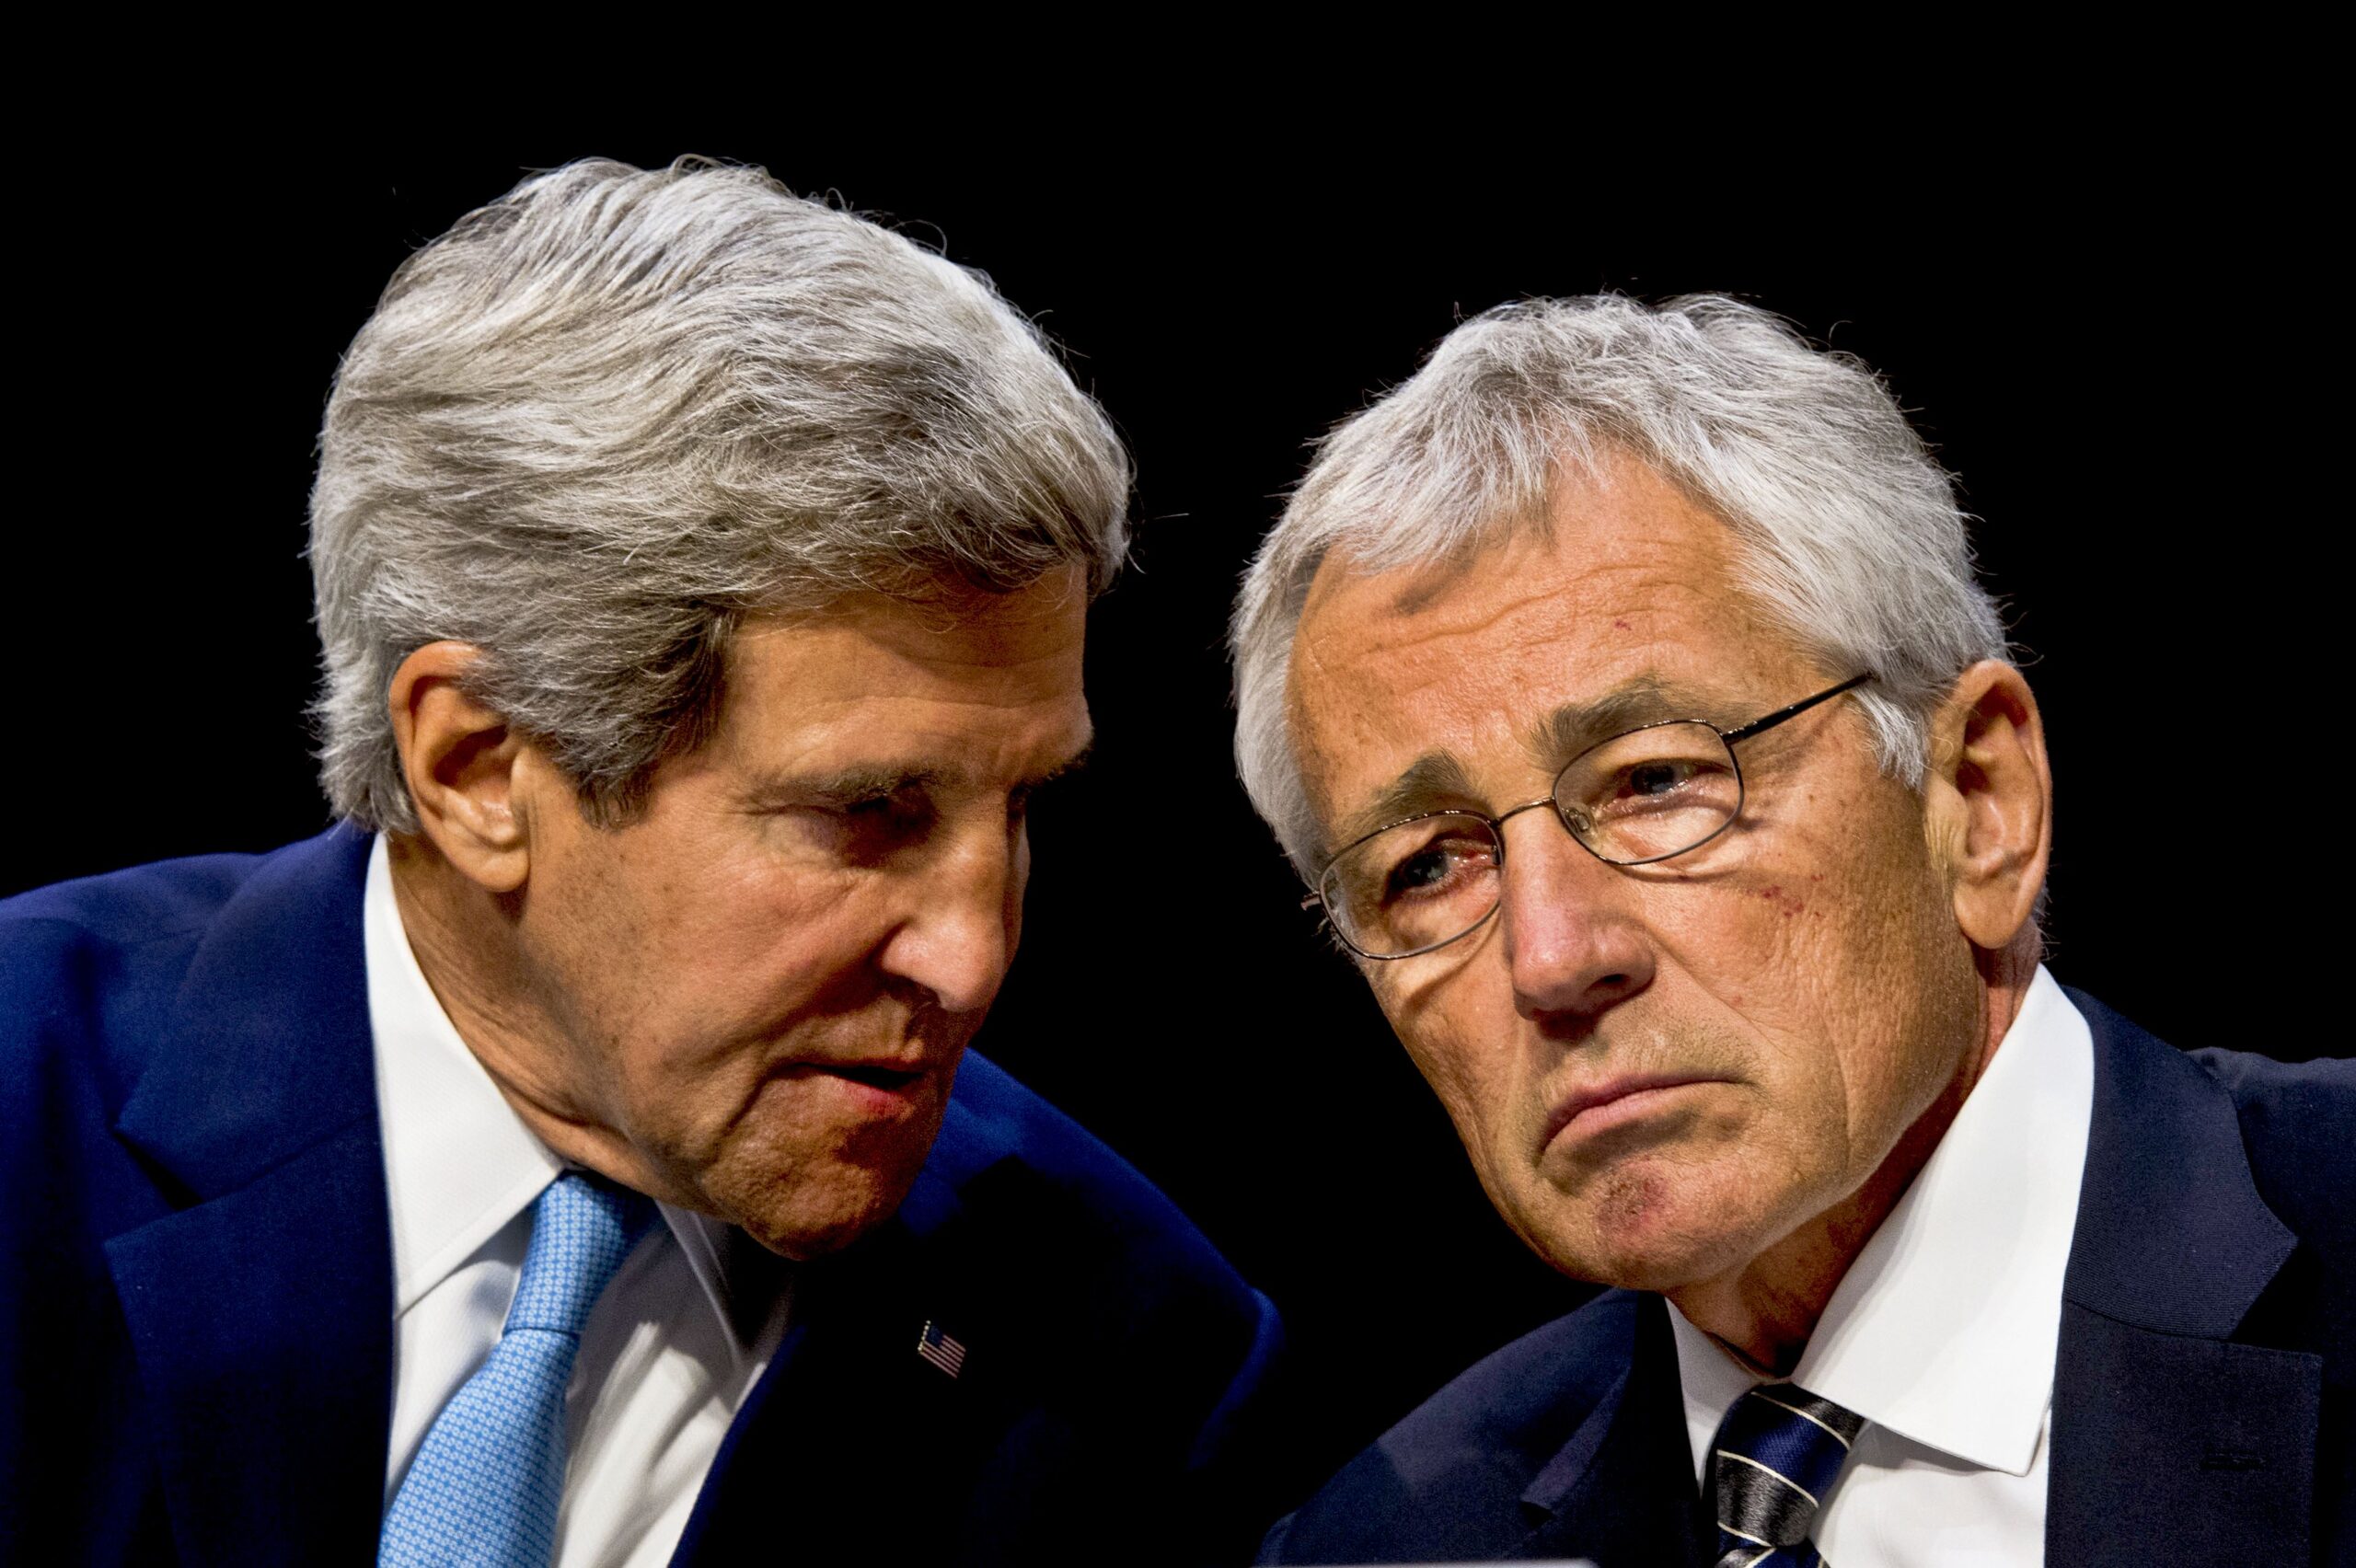 Kerry, Hagel Press Senate To Approve Syrian Strikes: ‘Deter And Degrade’